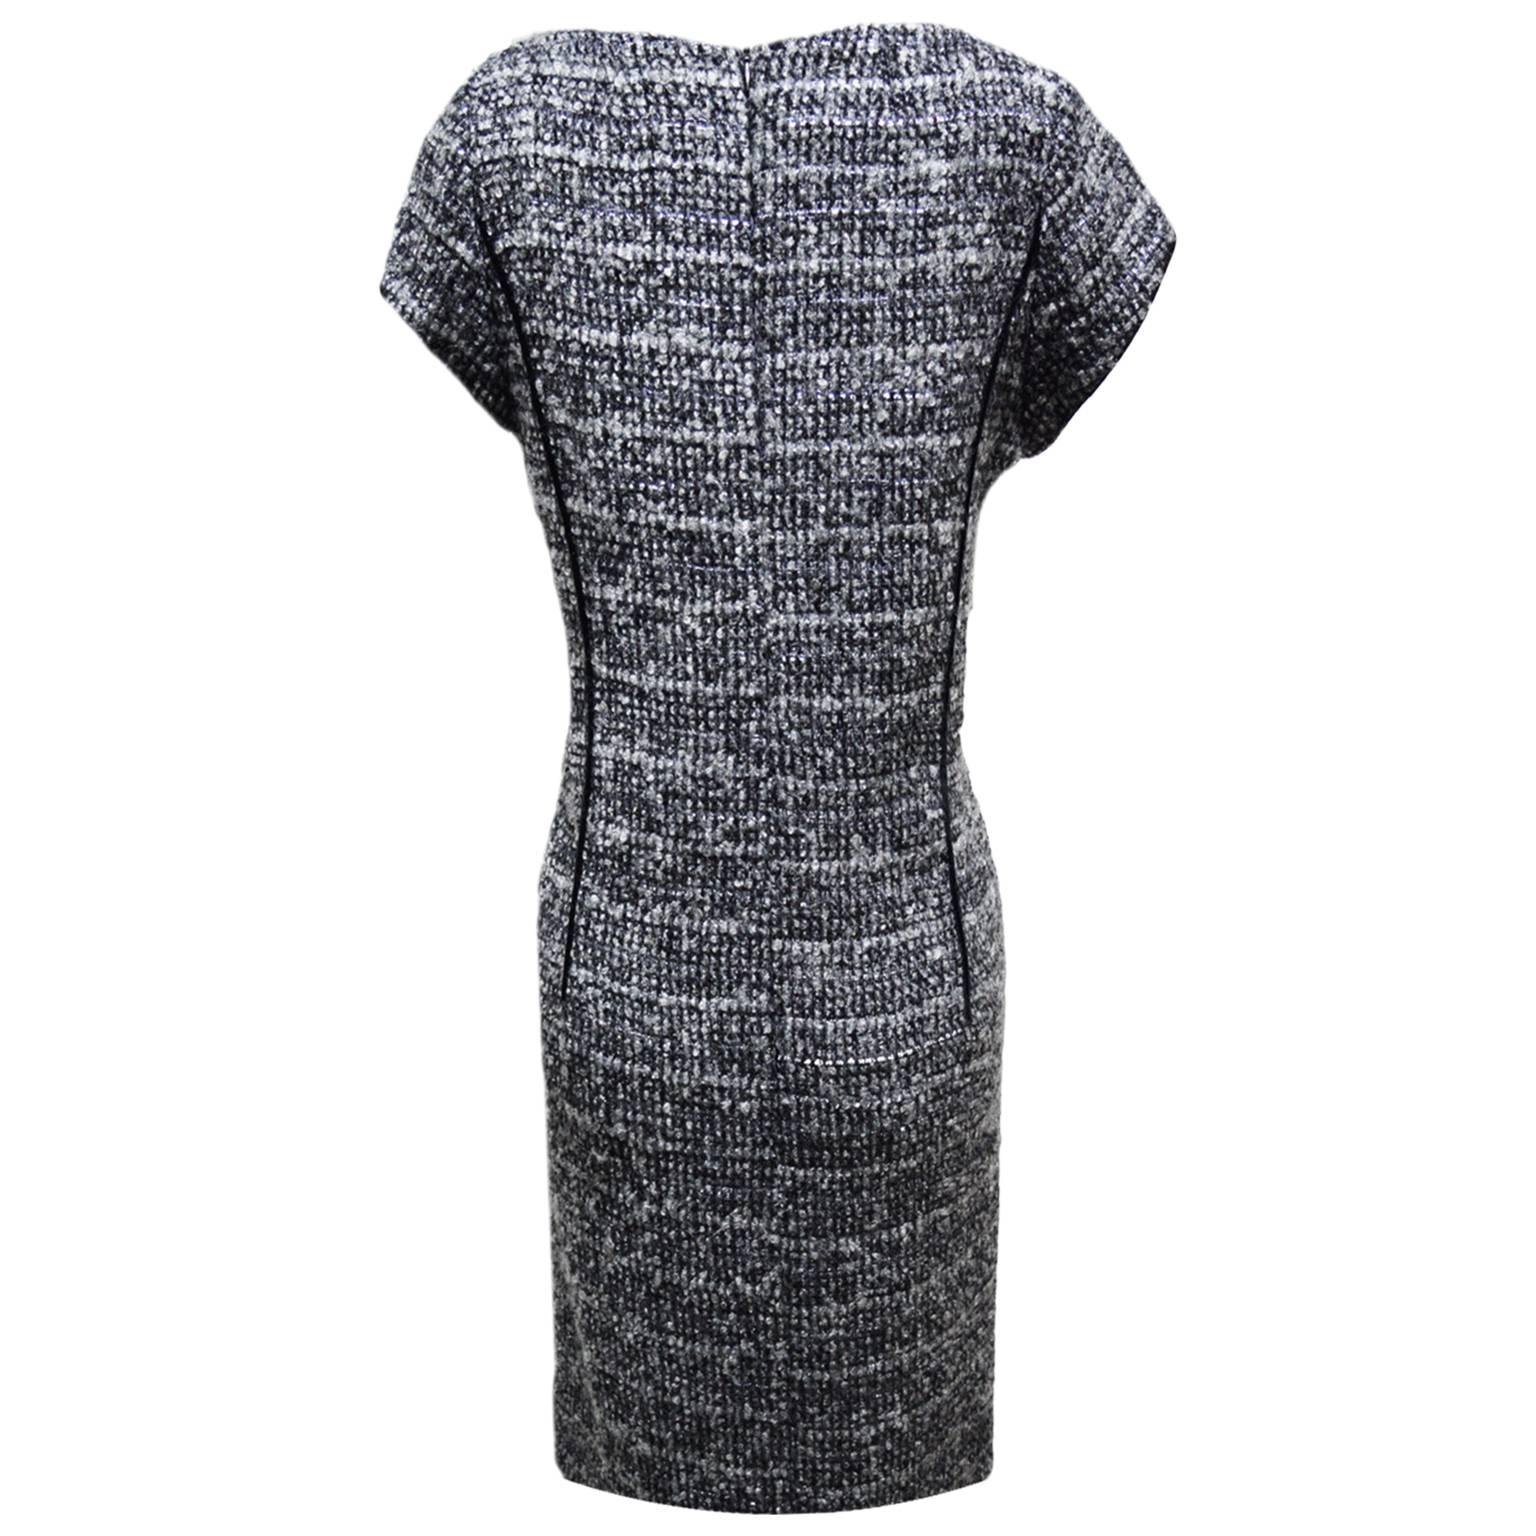 This dress by Lourdes Chaves is 100% wool and is fully lined. The dress is a heather grey print with elongating black piping running along the bodice, creating a slimming look. Zipped back closure. 